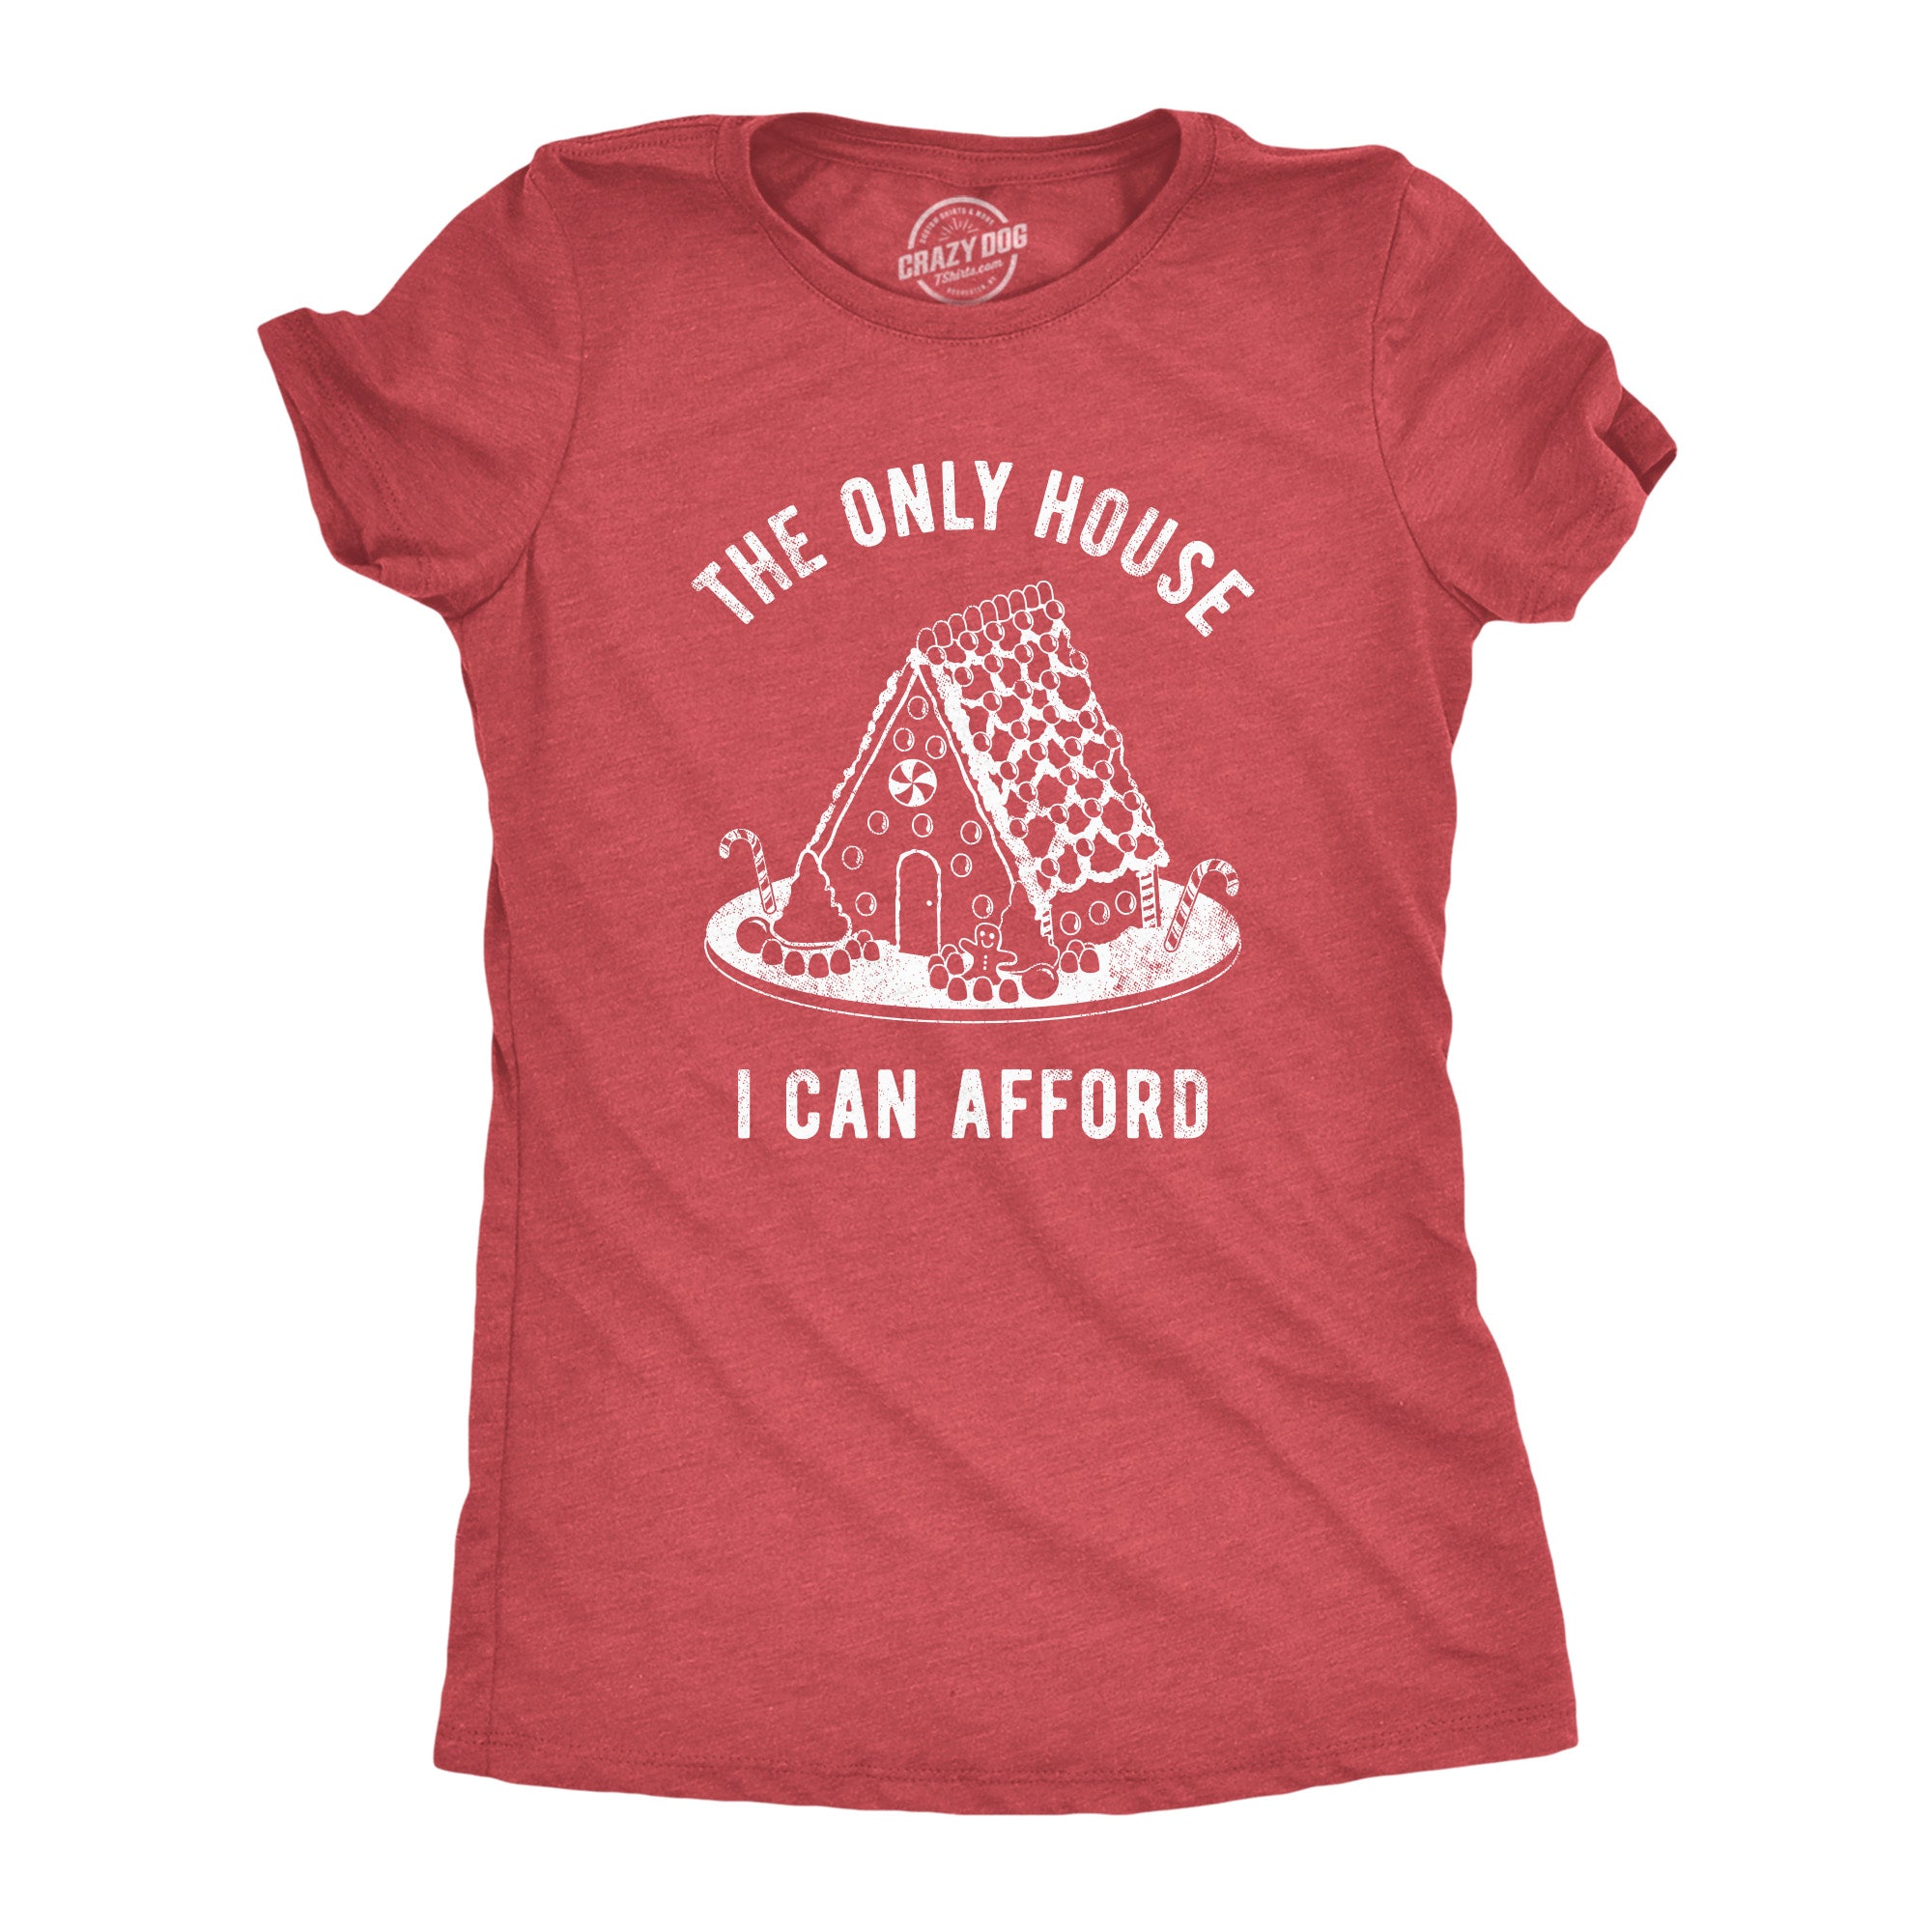 Funny Heather Red - HOUSE The Only House I Can Afford Womens T Shirt Nerdy Christmas sarcastic Tee